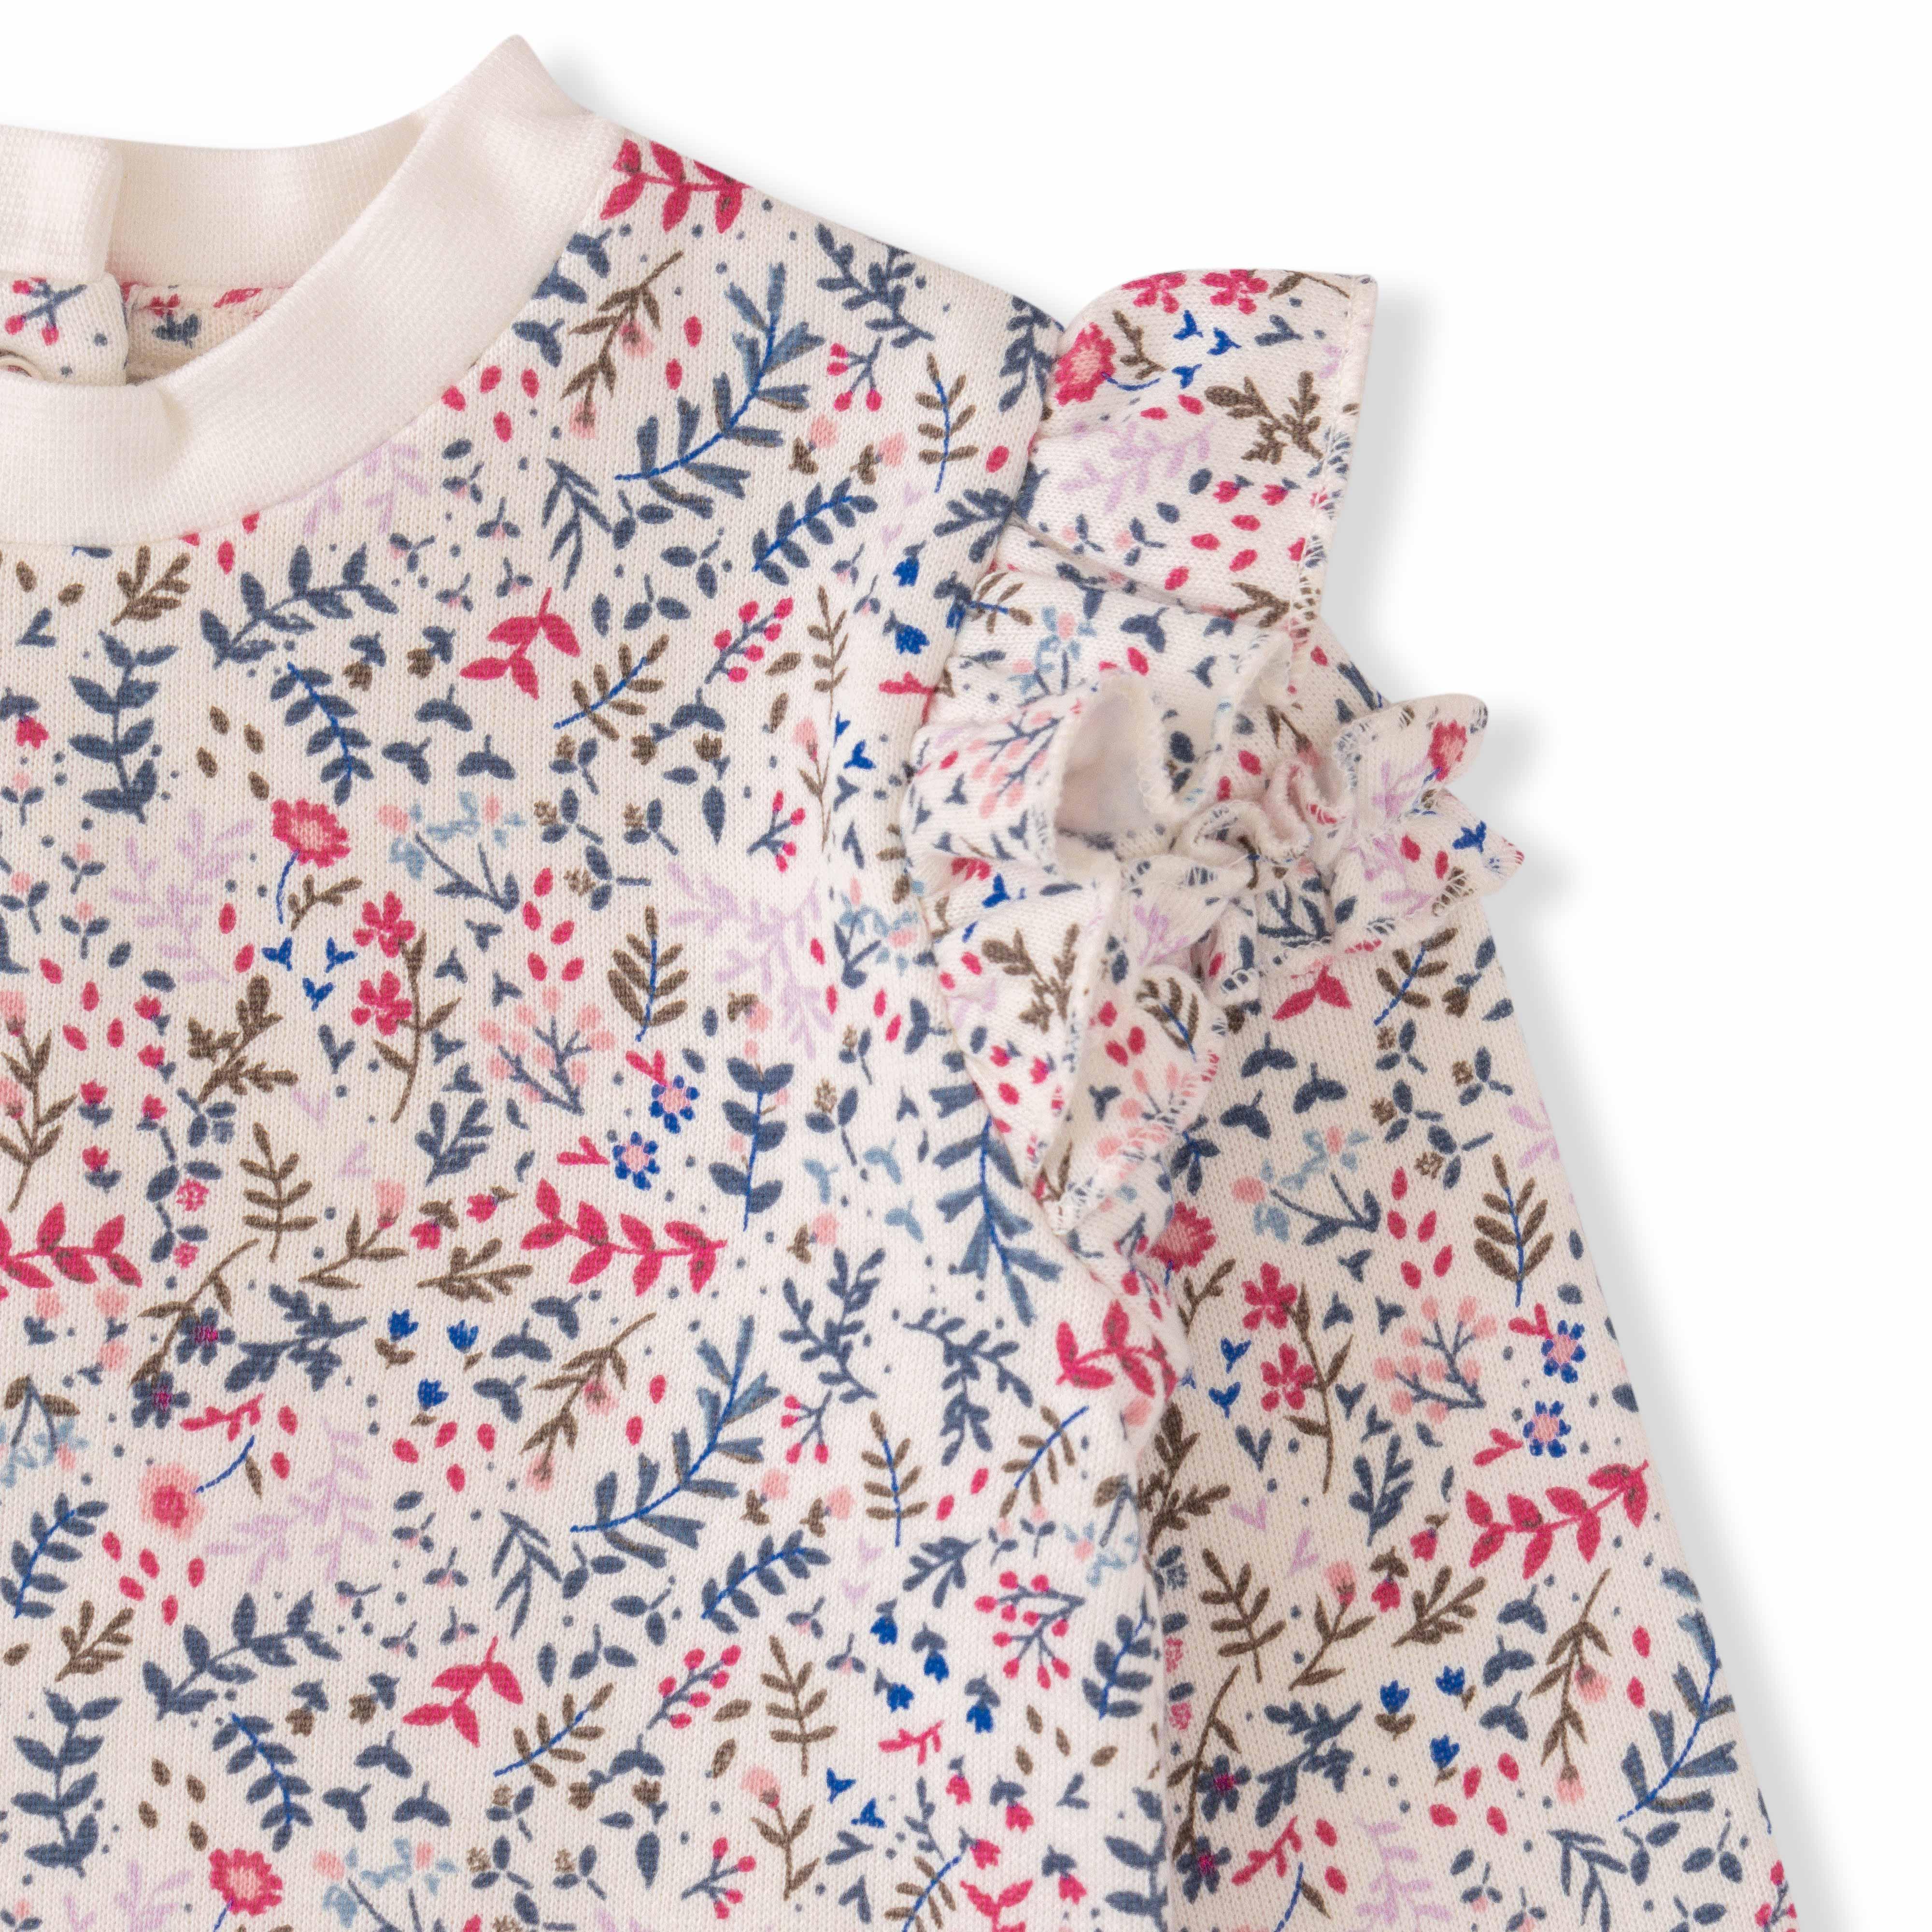 Baby Girls All Over Printed Sweatshirt - Juscubs